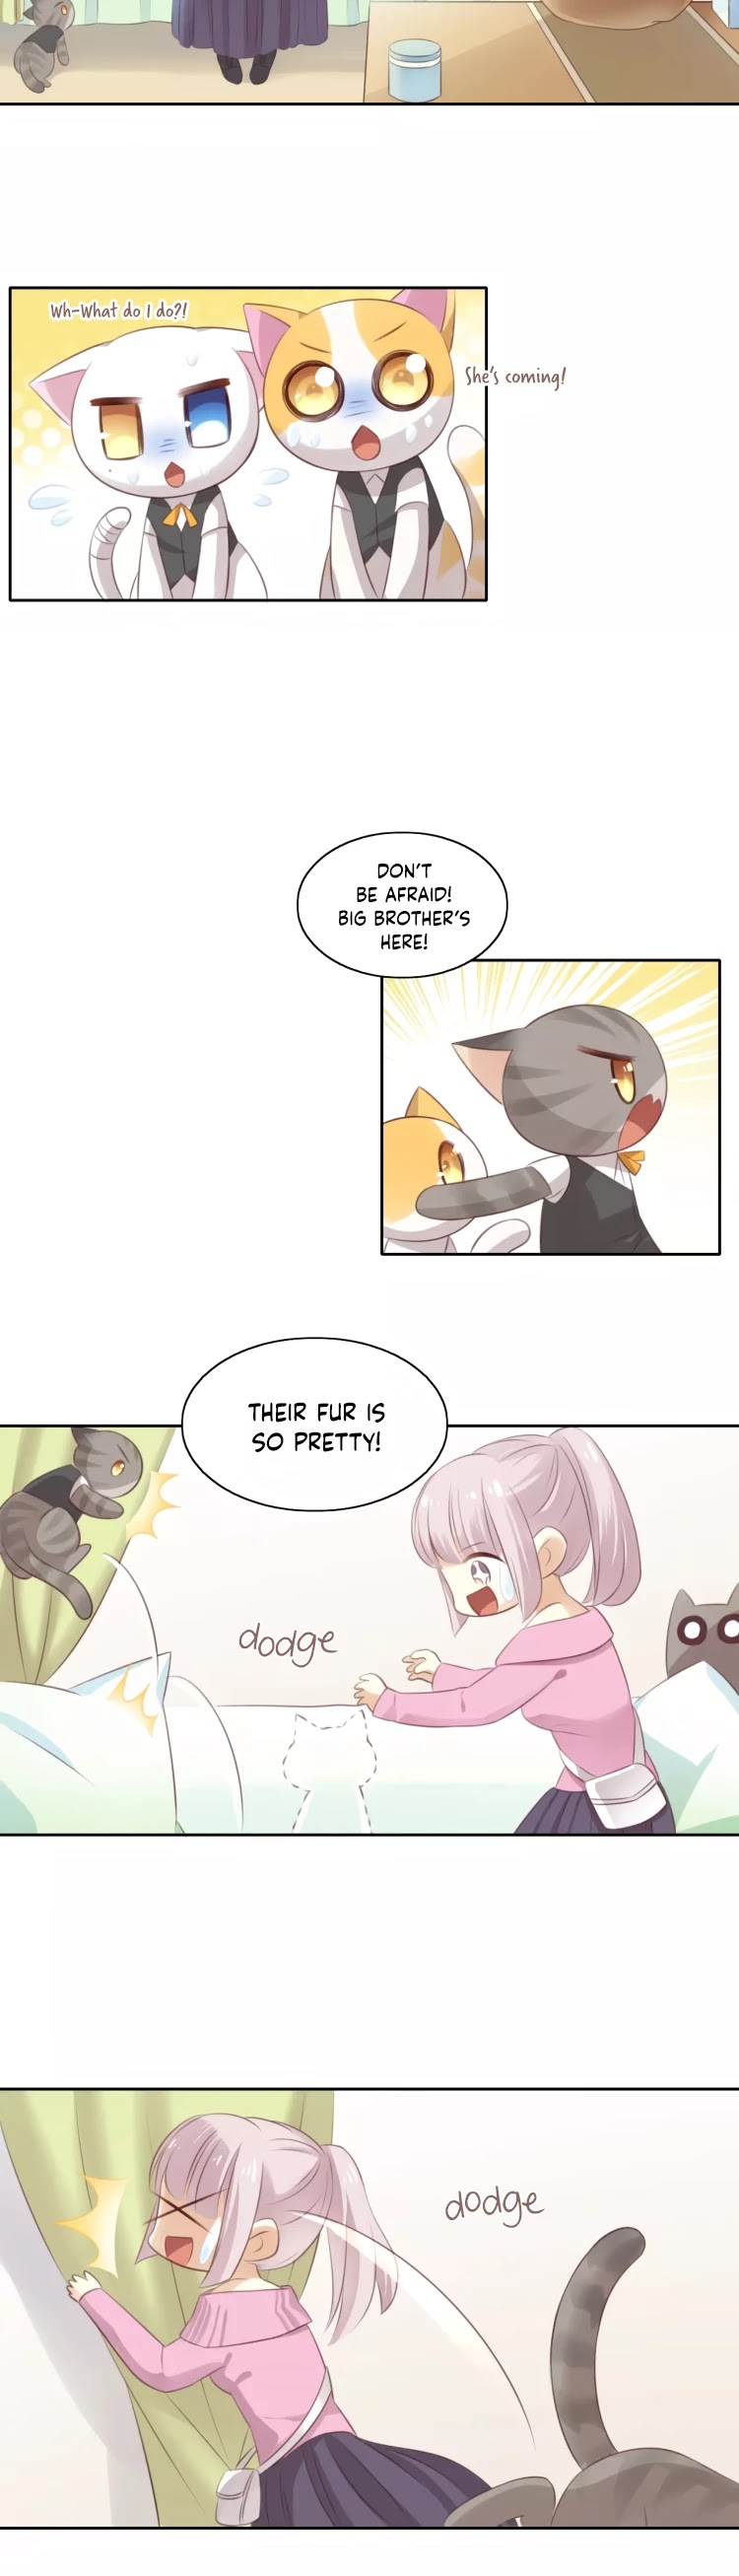 Under The Paws Of Cats - Page 4